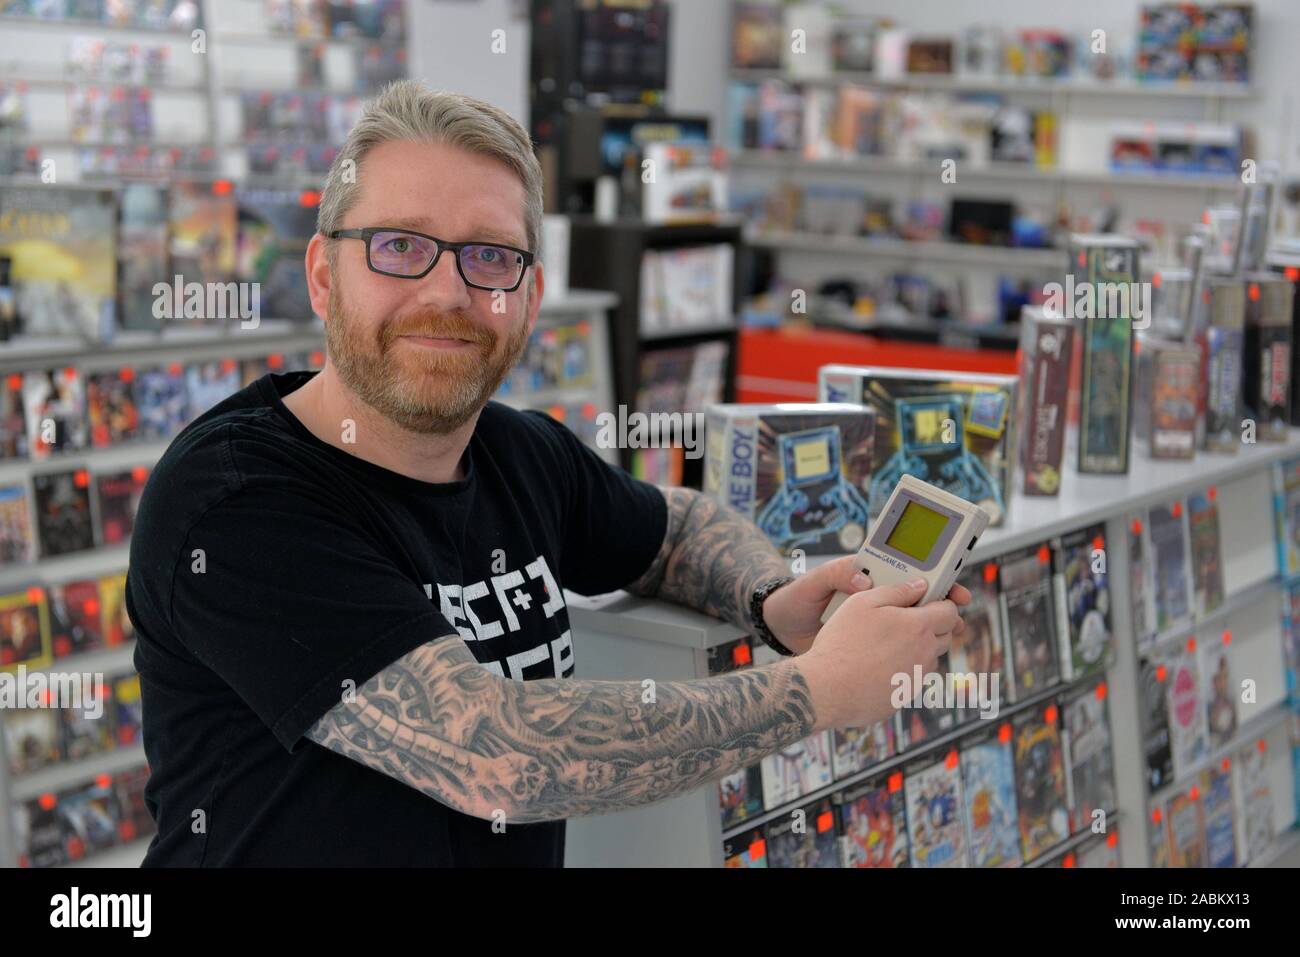 game store that sells old games